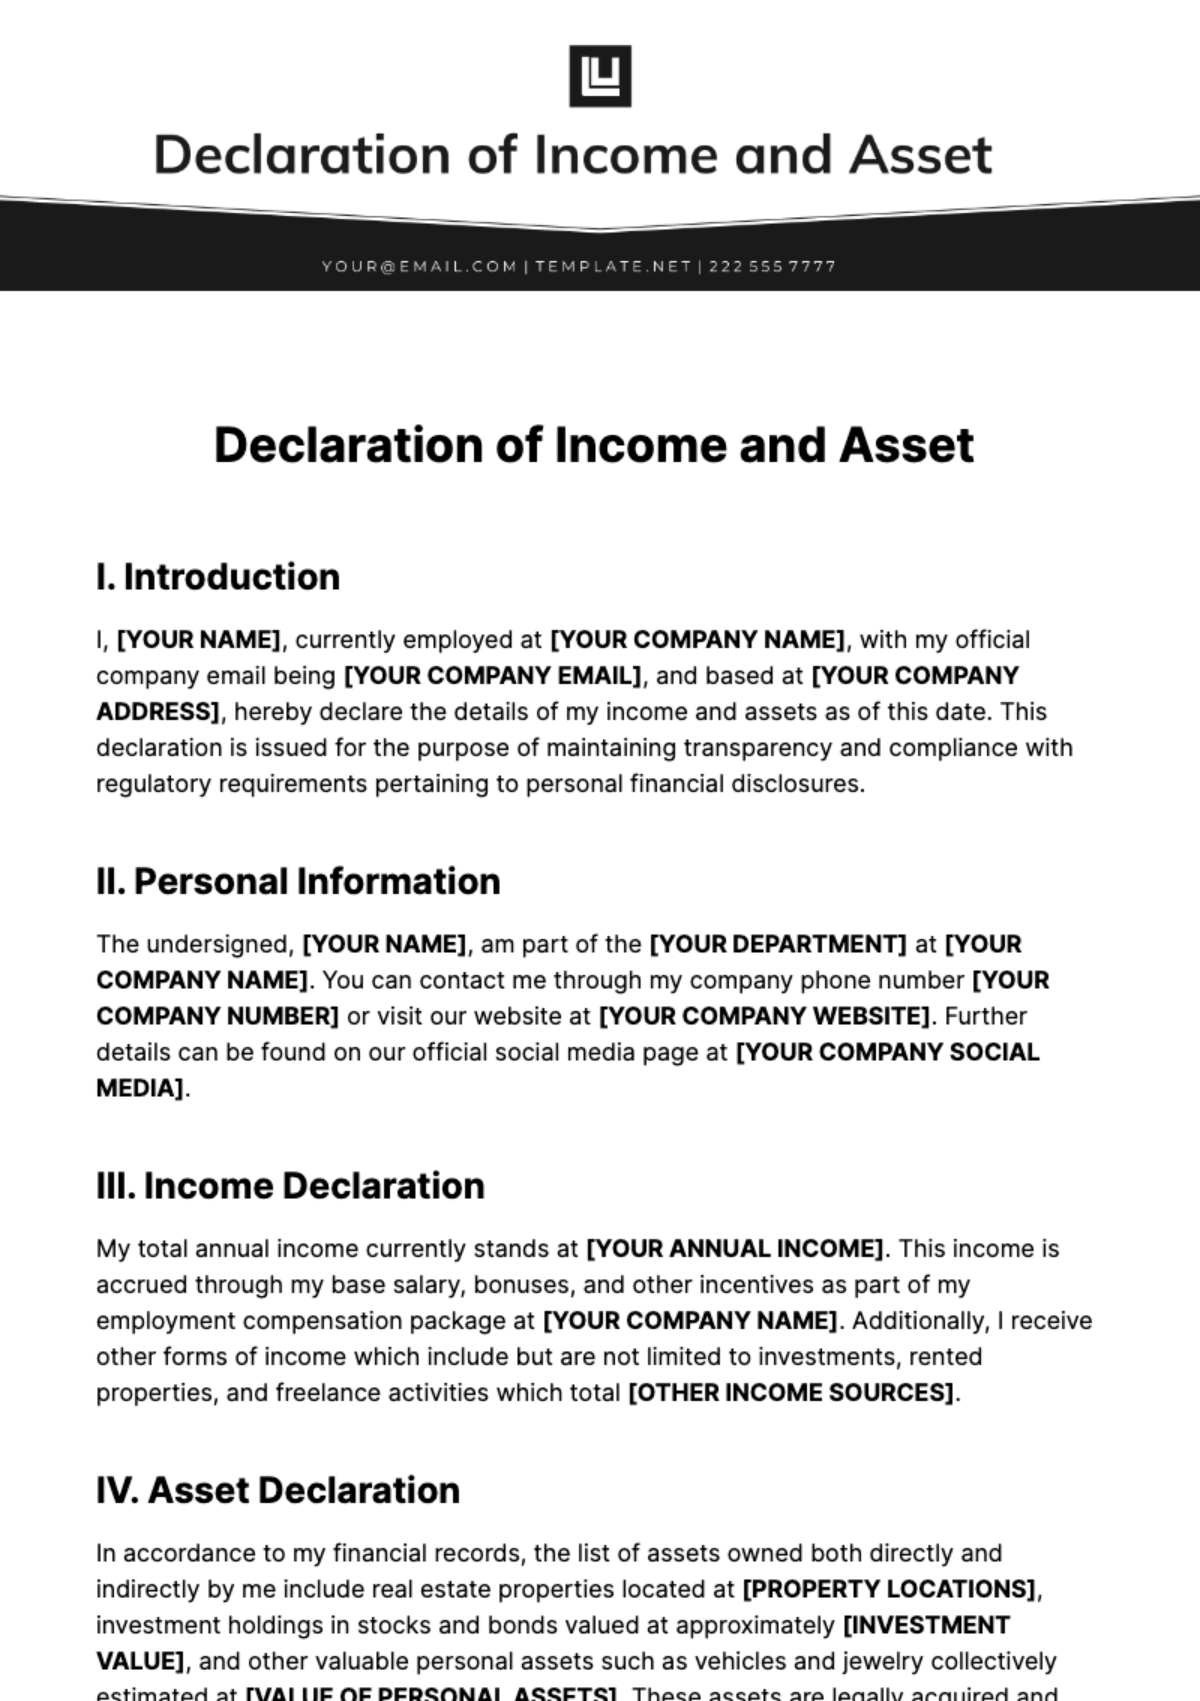 Declaration of Income and Asset Template